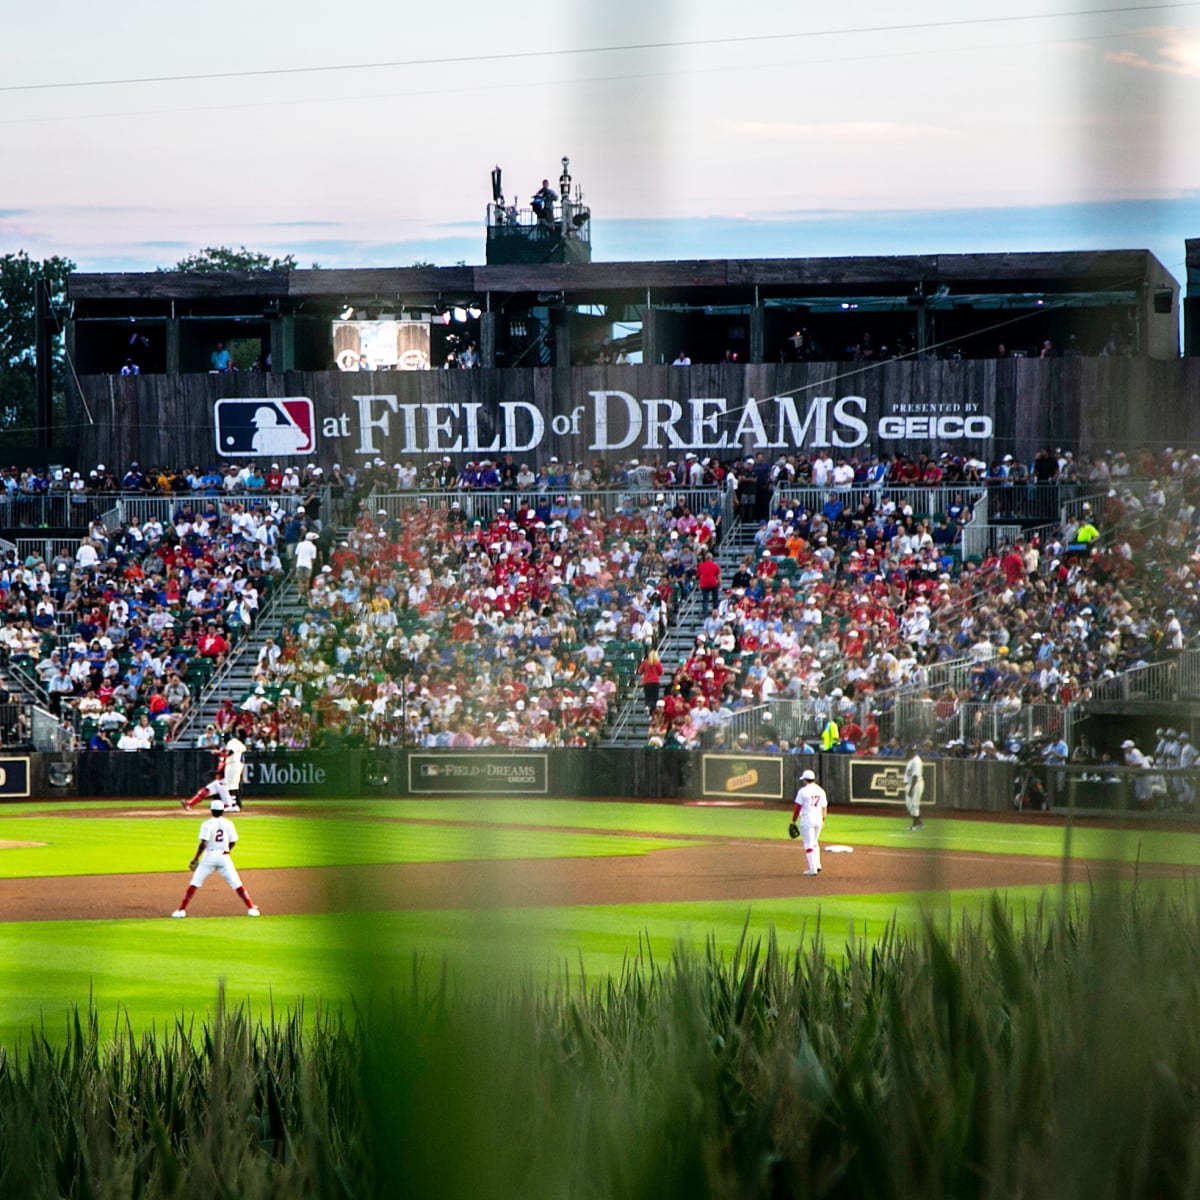 MLB Field of Dreams game deserves regular at bats in the schedule - Sports  Illustrated